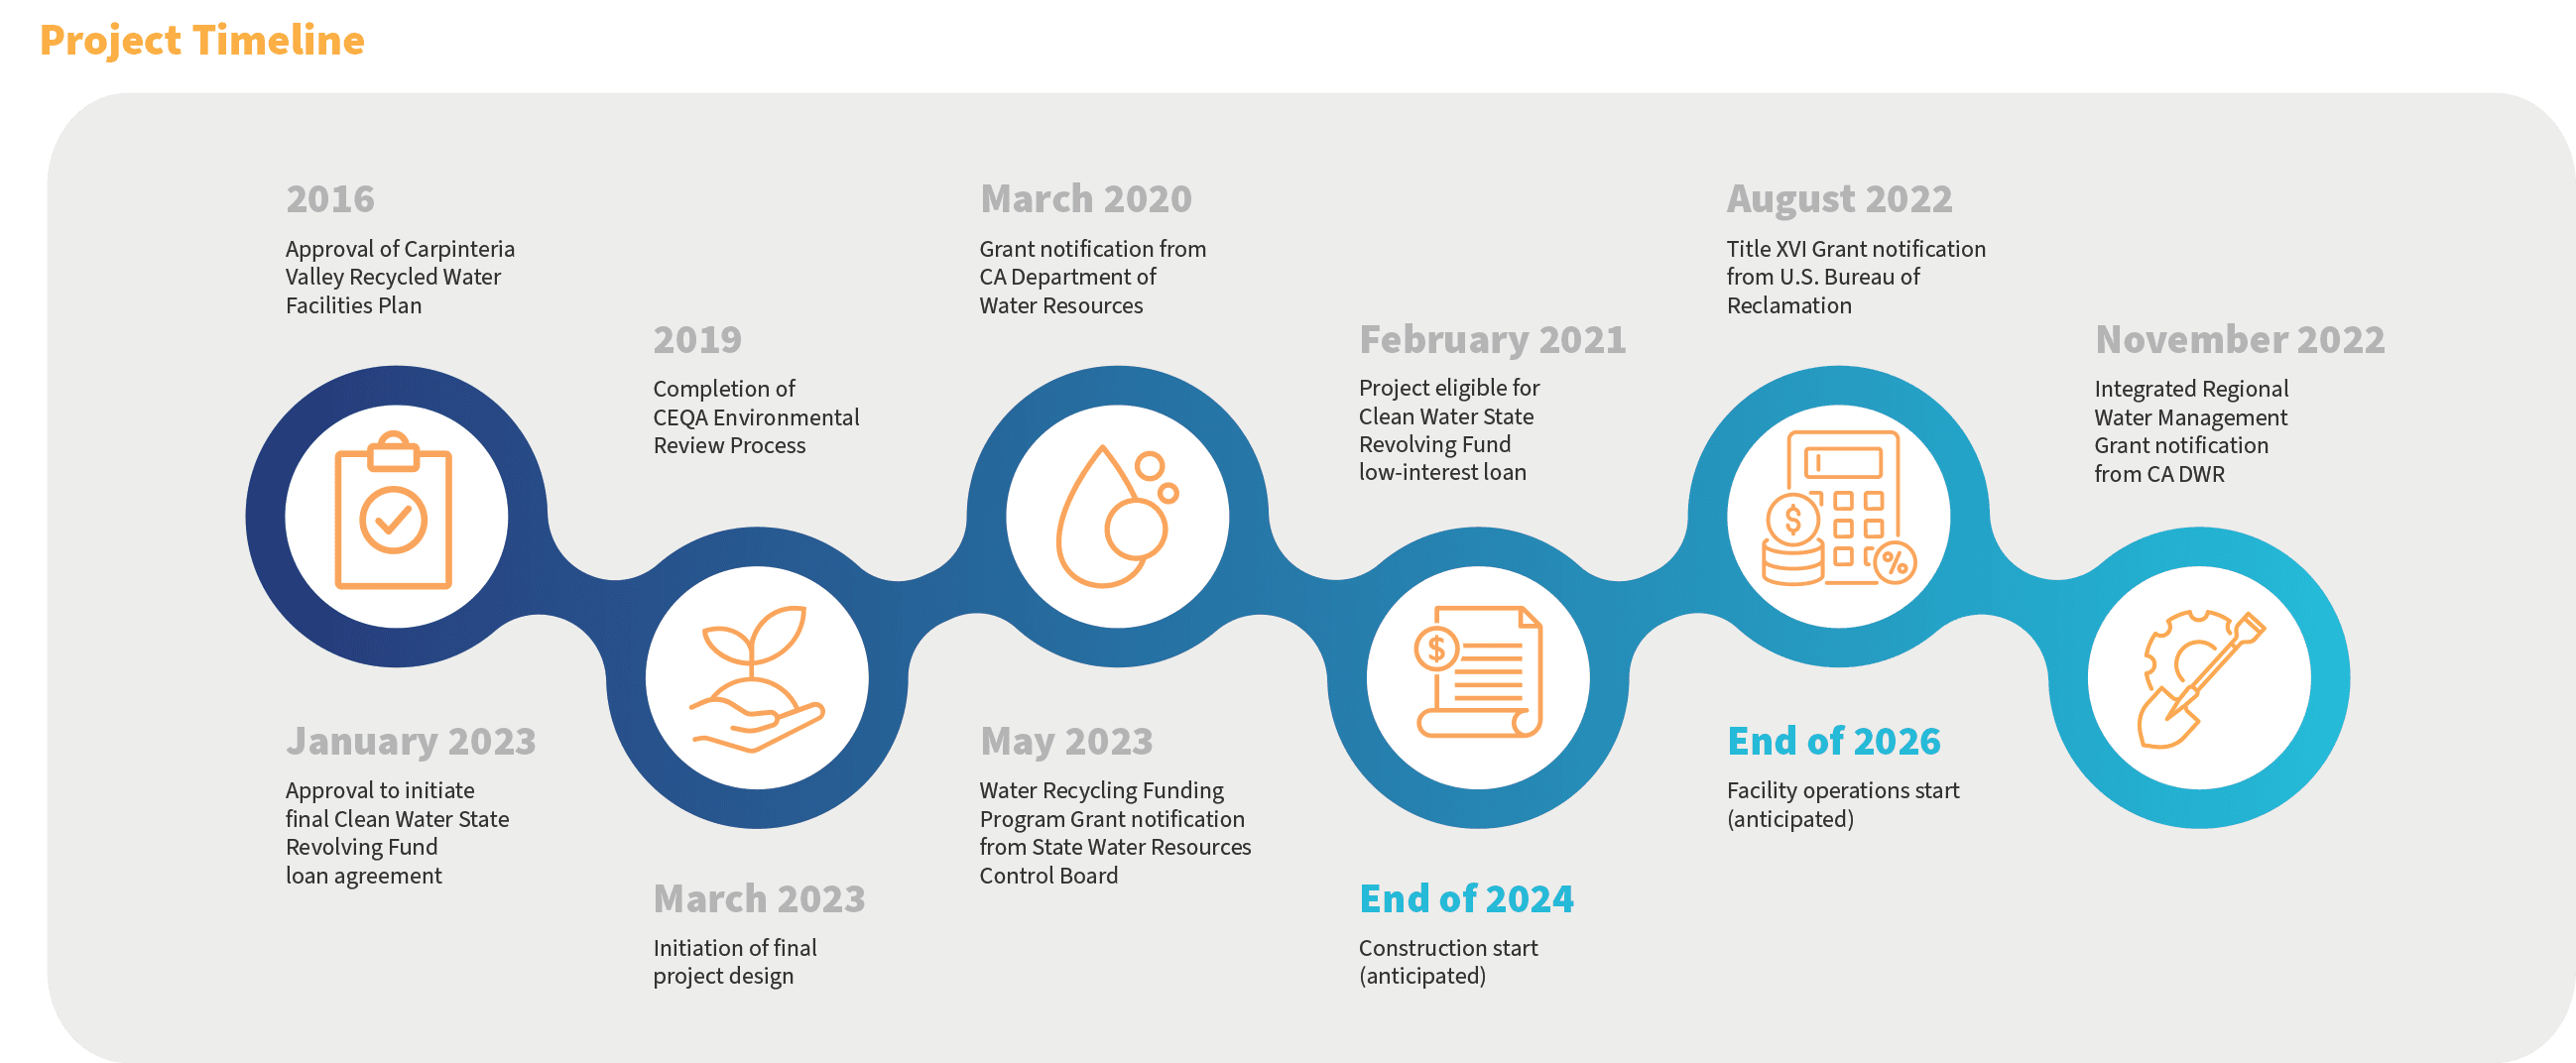 CAPP Project Timeline beginning 2016 through projected end in 2026.